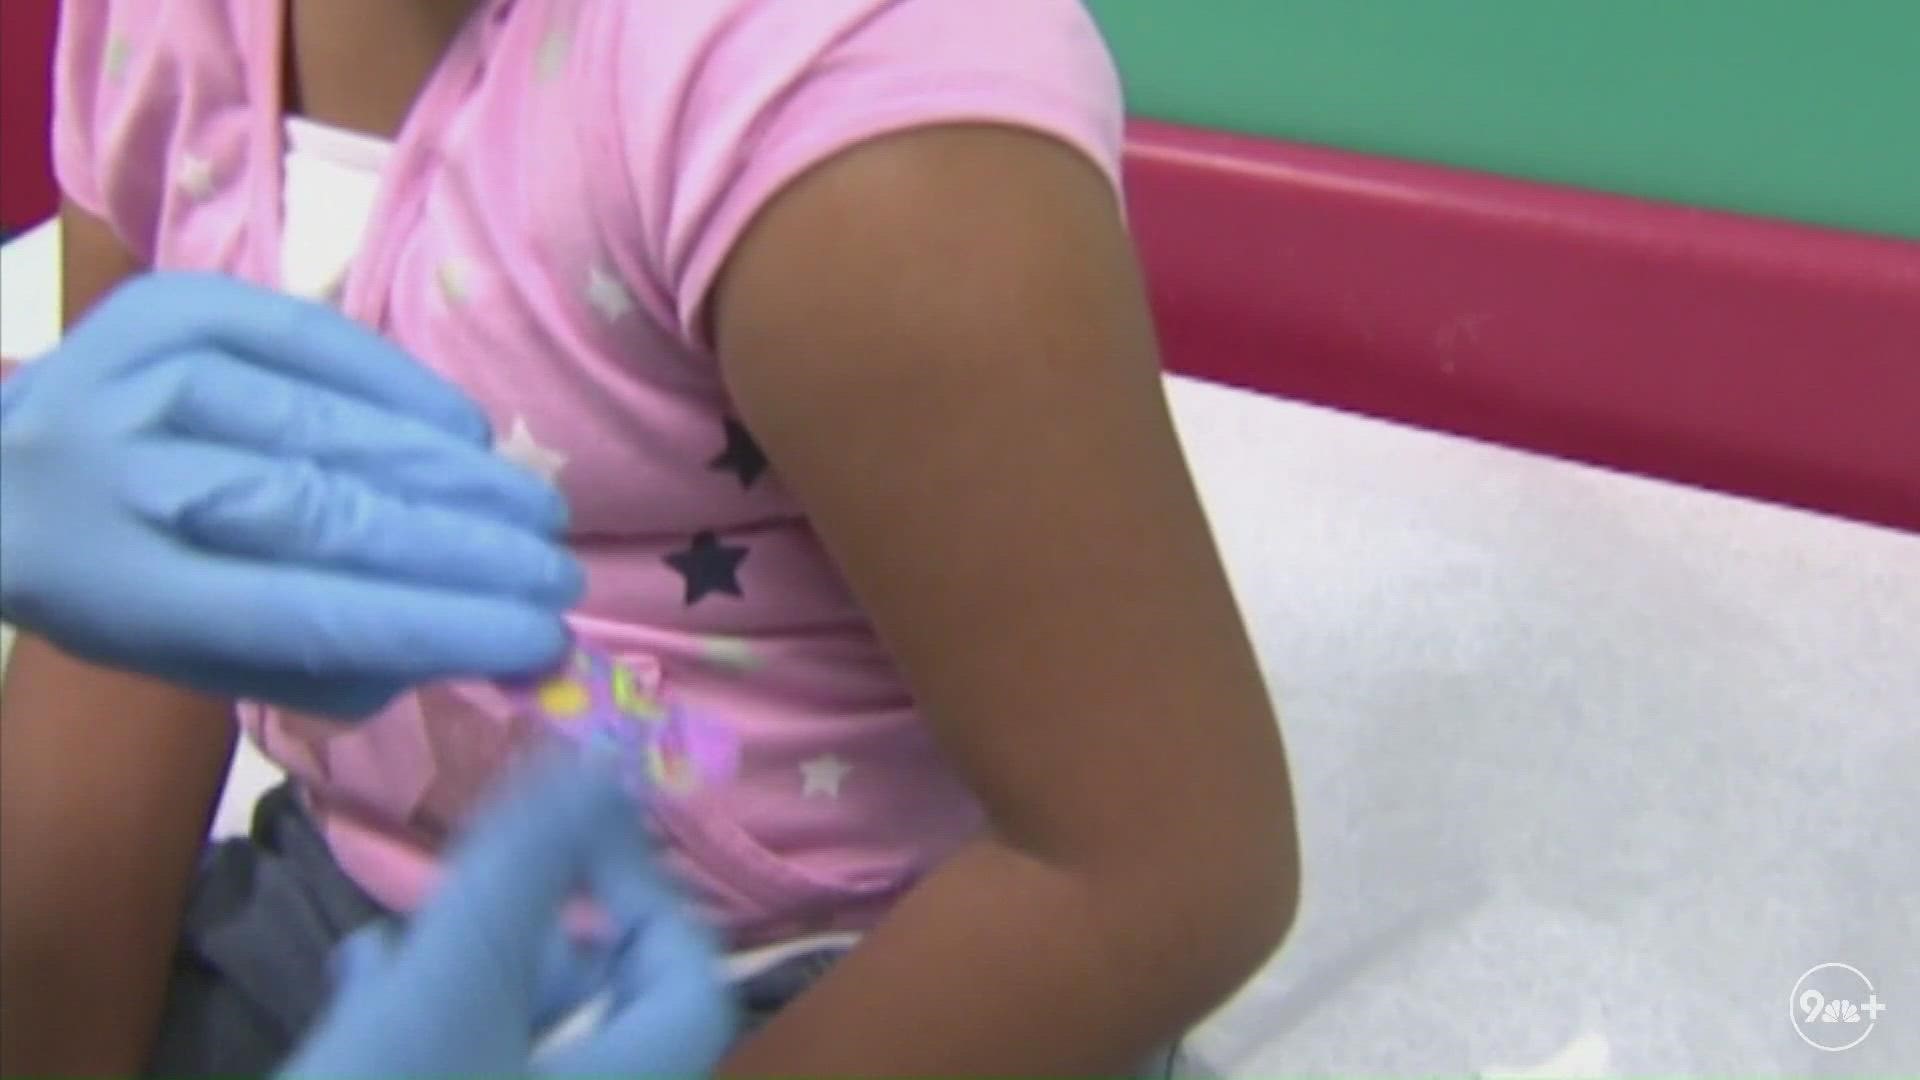 Colorado has received the vaccines for children under 5 years old and according to Vanessa Bernal of the CDPHE, they will begin to be administered this week.